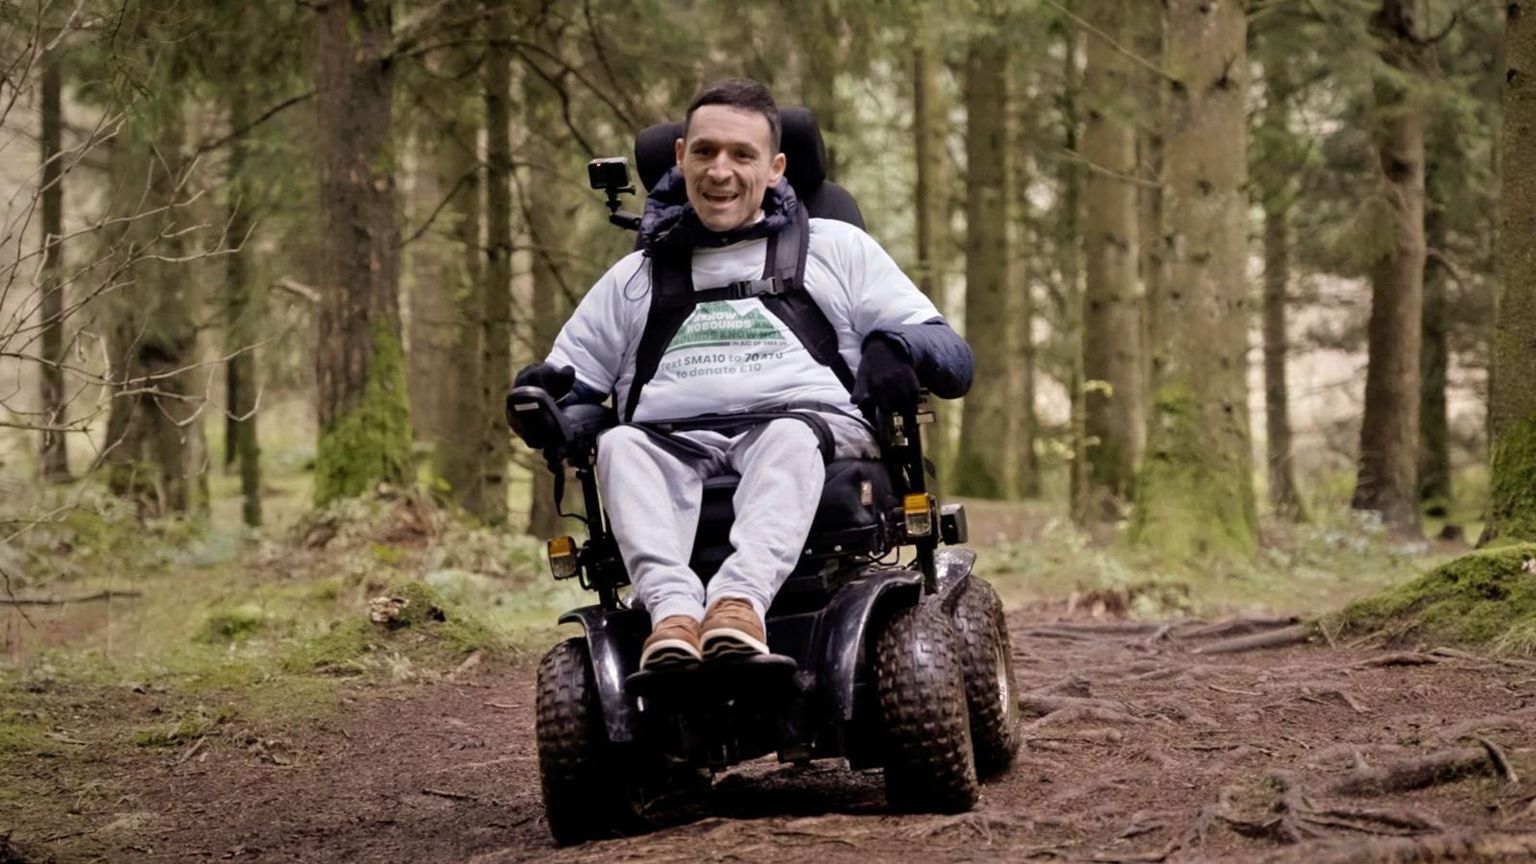 Josh Wintersgill who has spinal muscular atrophy in his all terrain wheelchair in a woodland setting